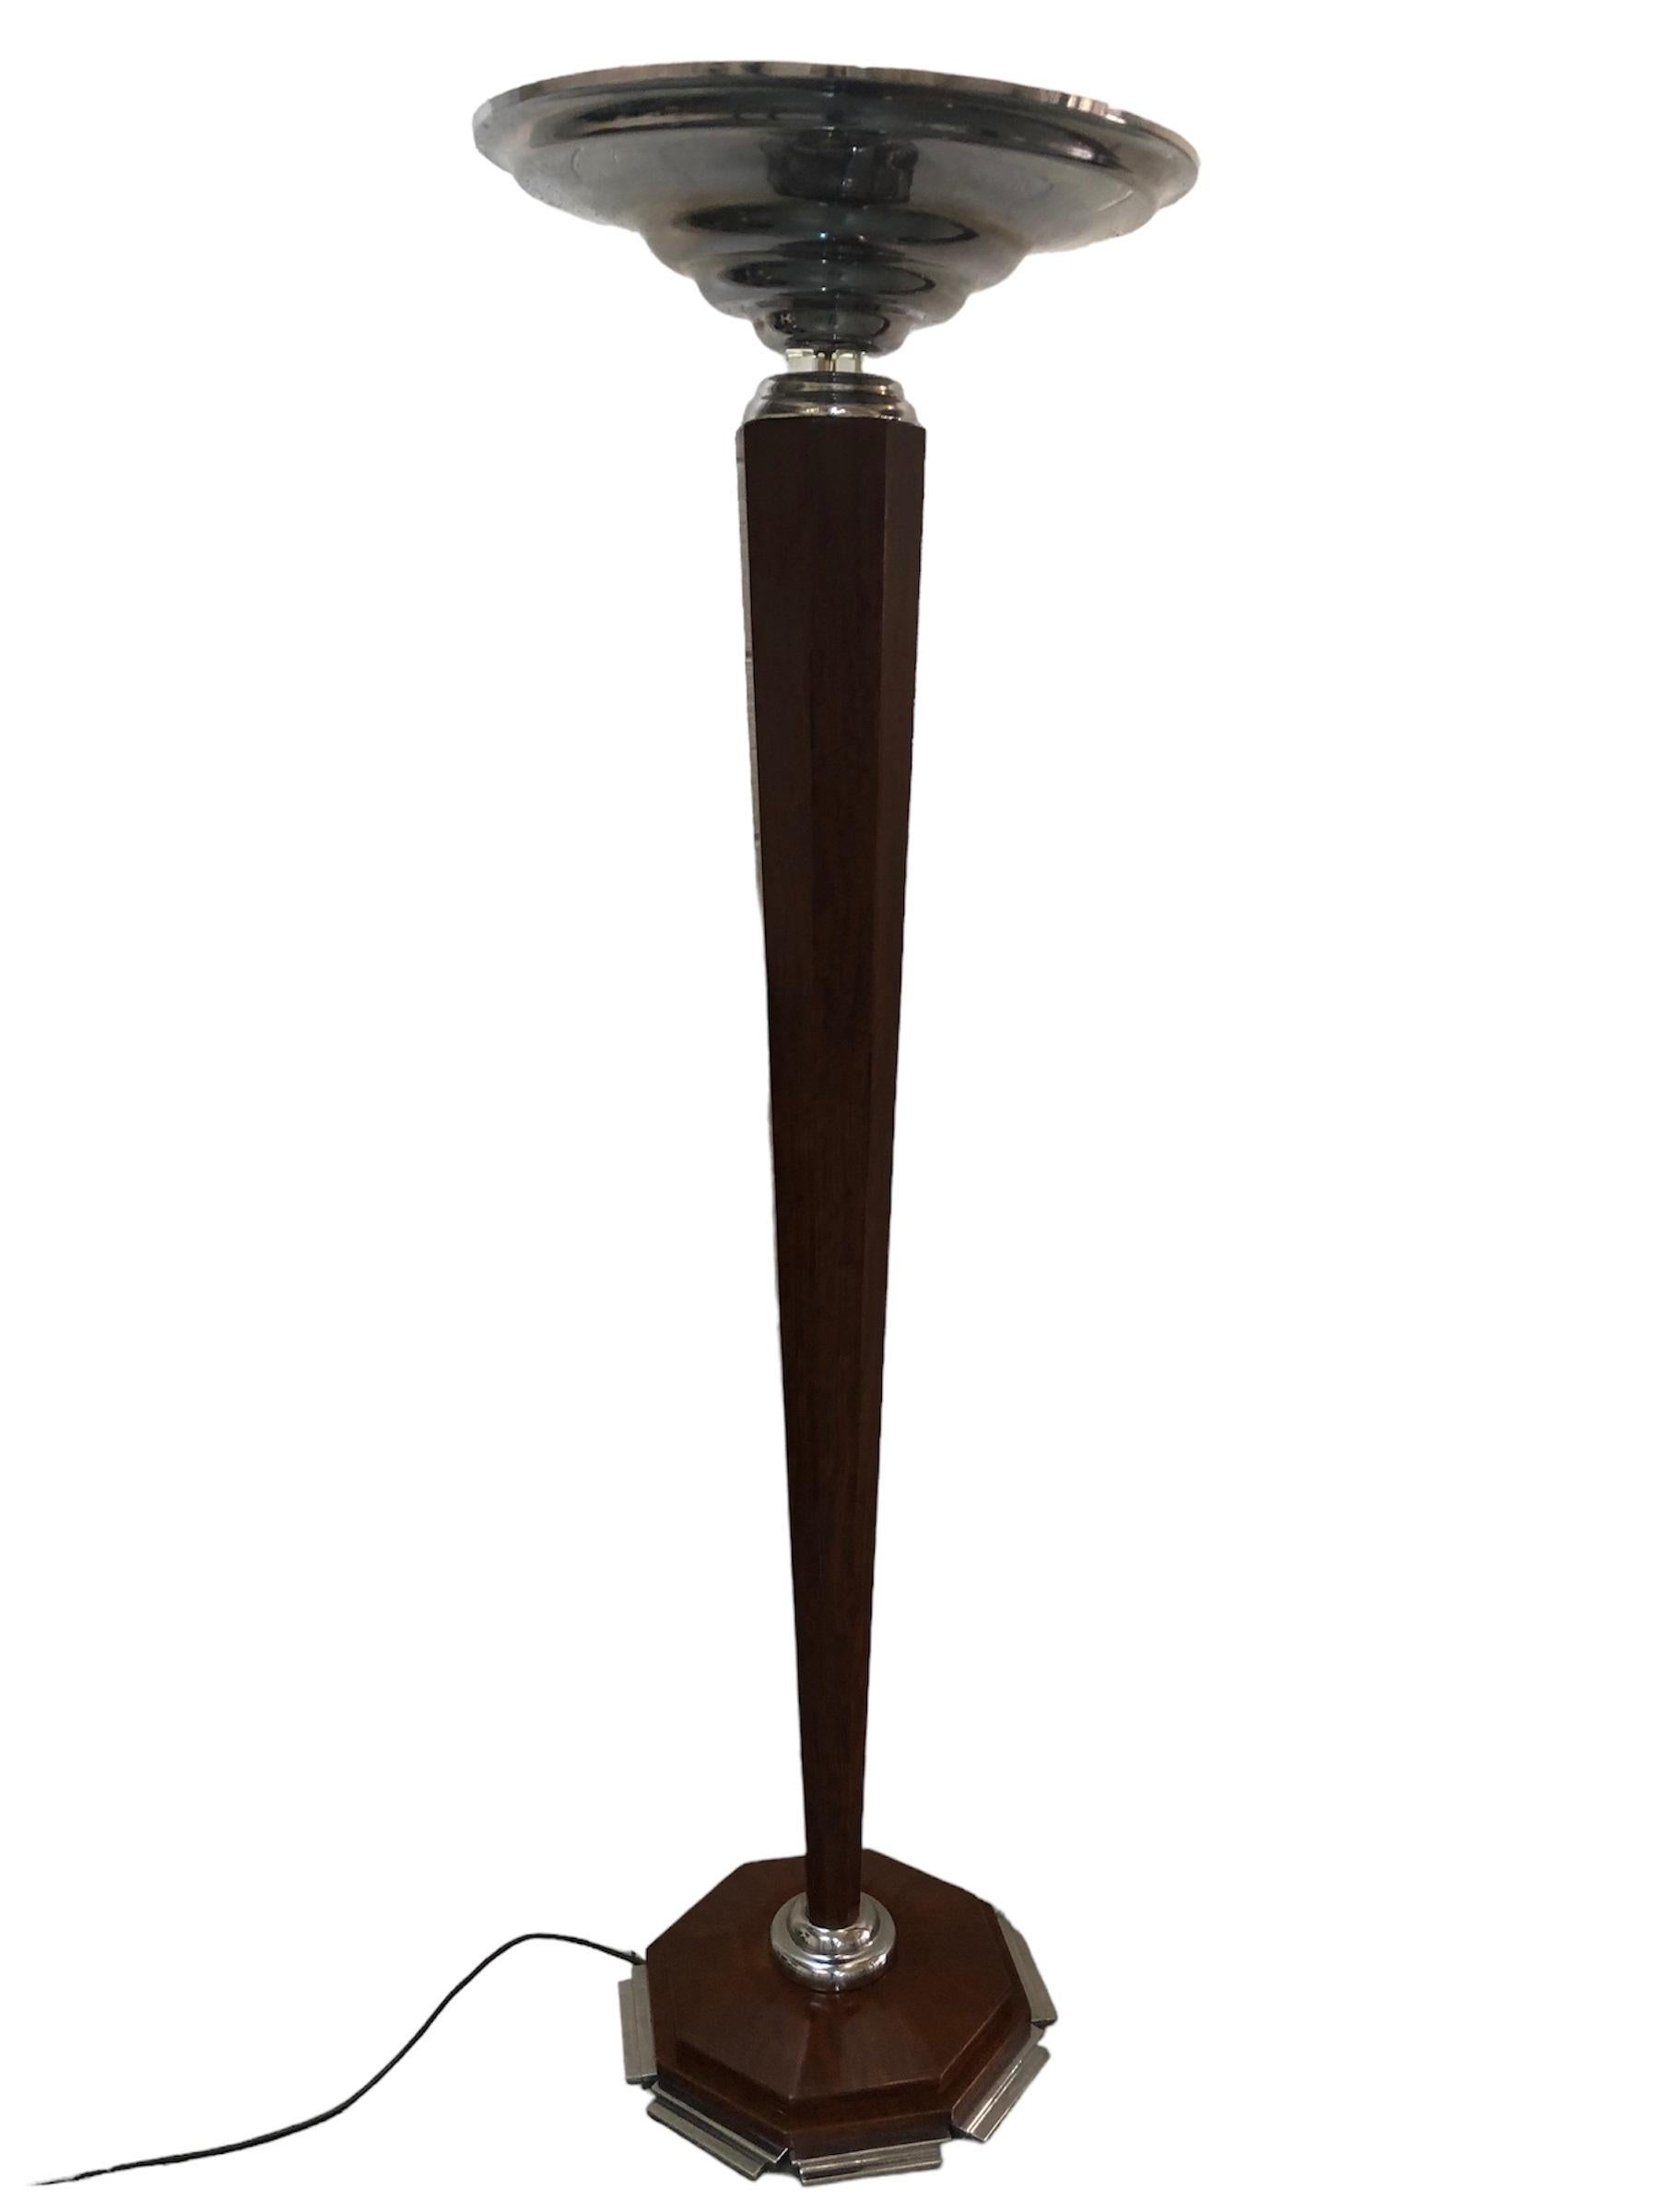 2 Art Deco Floor Lamps, France, Materials: Wood, glass and Chrome, 1920 For Sale 14